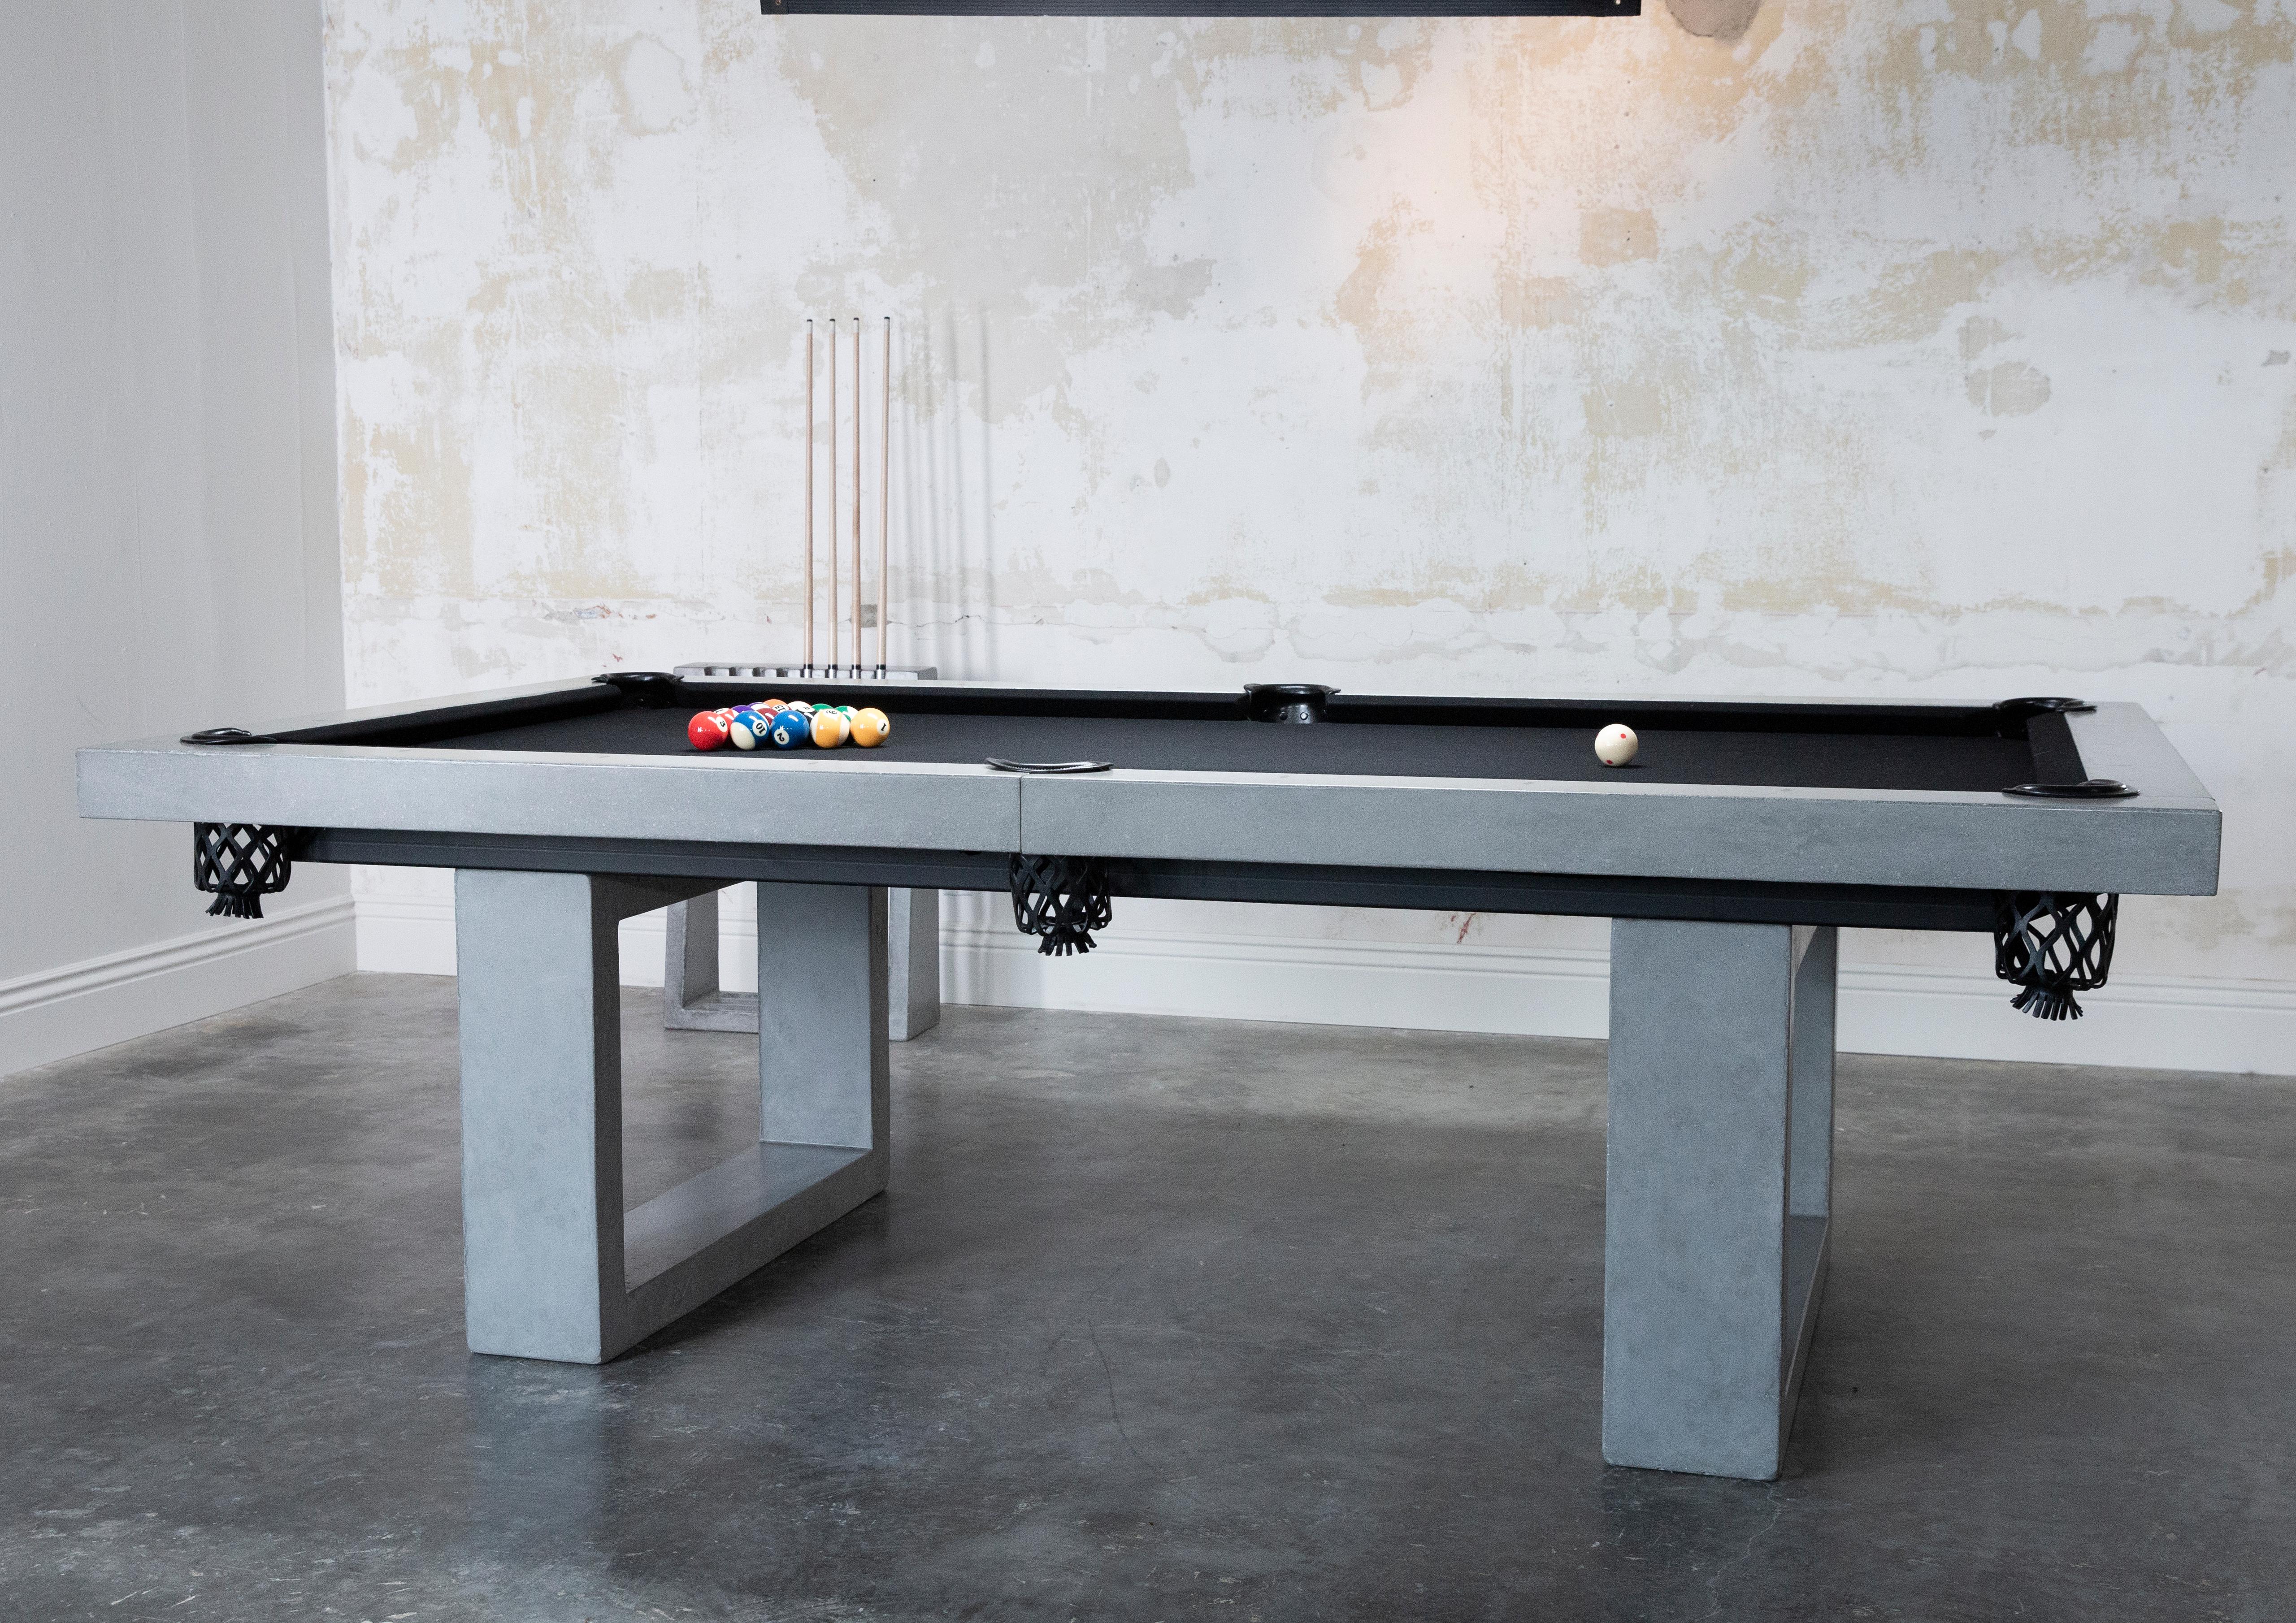 The classic James de Wulf Concrete Billiards Table is a staple to any game room. The regulation sized table is constructed of concrete reinforced with carbon fiber. It features a smooth, high-performance finished surface, layered in premium black